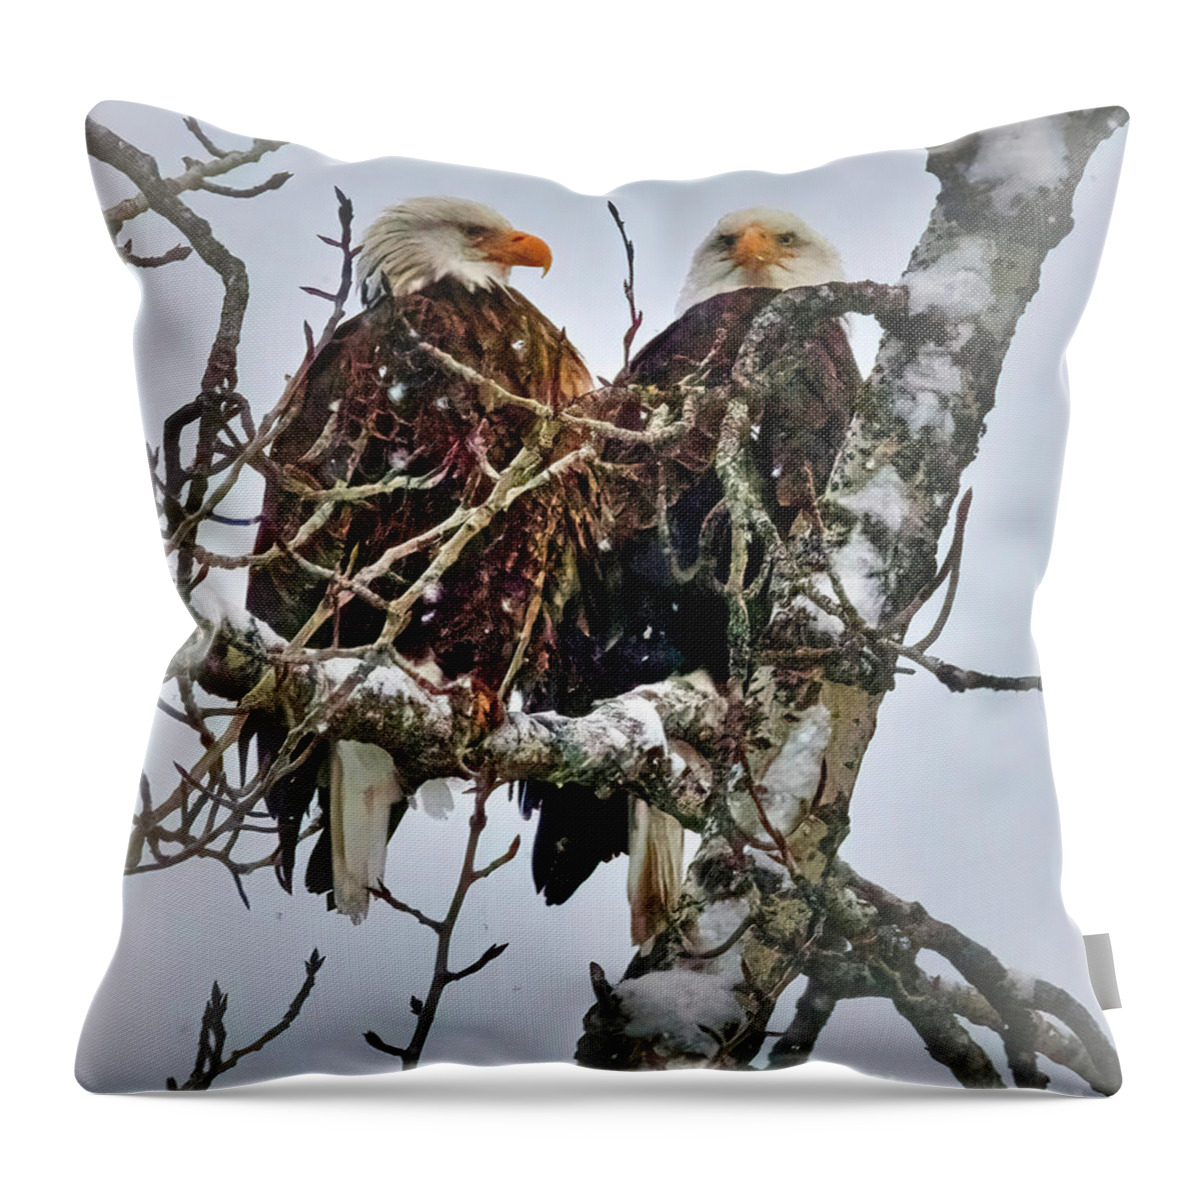 Eagle Throw Pillow featuring the photograph Bald Eagle Pair by Thomas Nay